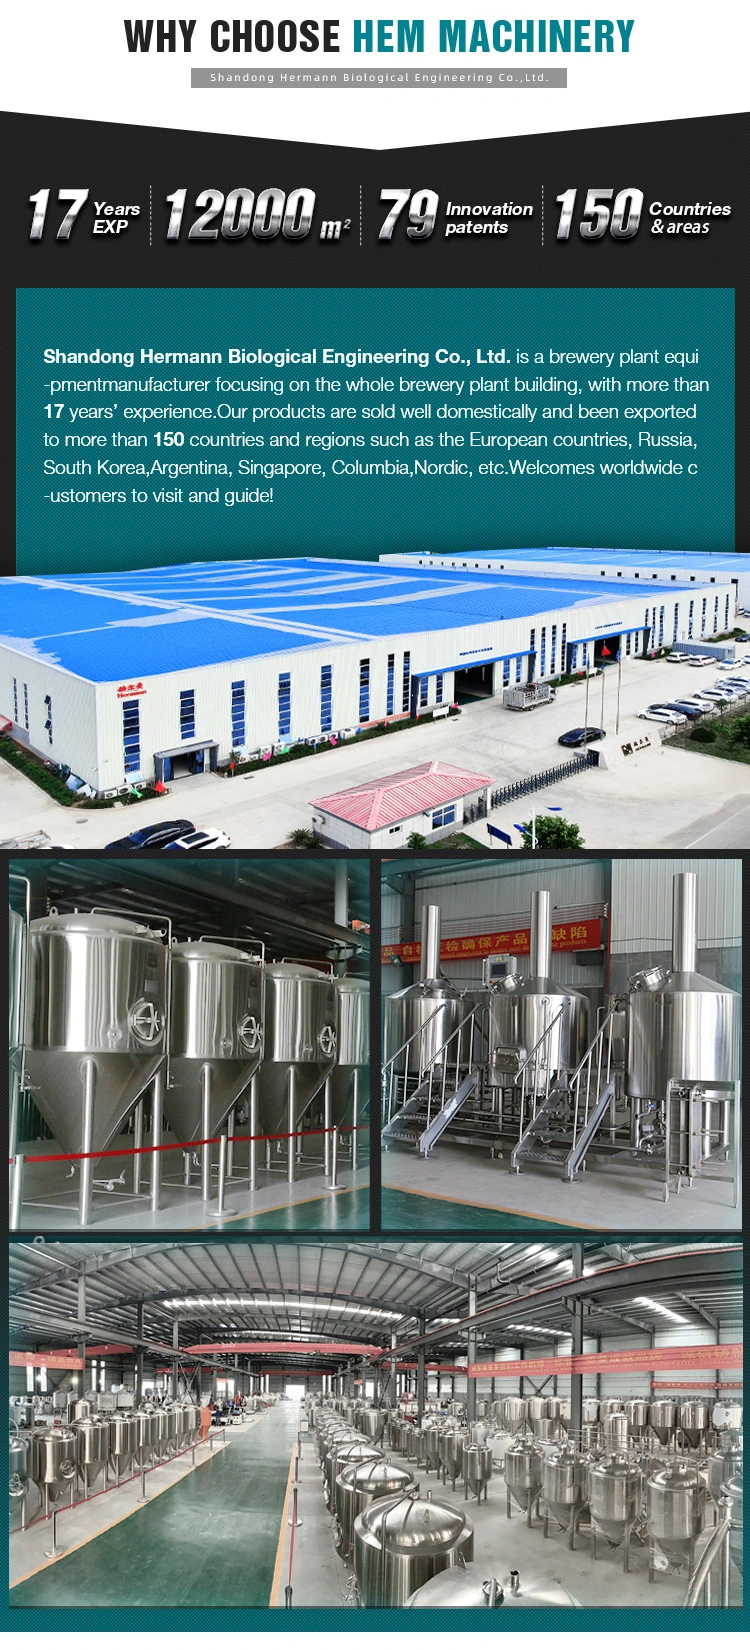 5000L Complete Beer Brewing Equipment Commercial Brewery for Sale